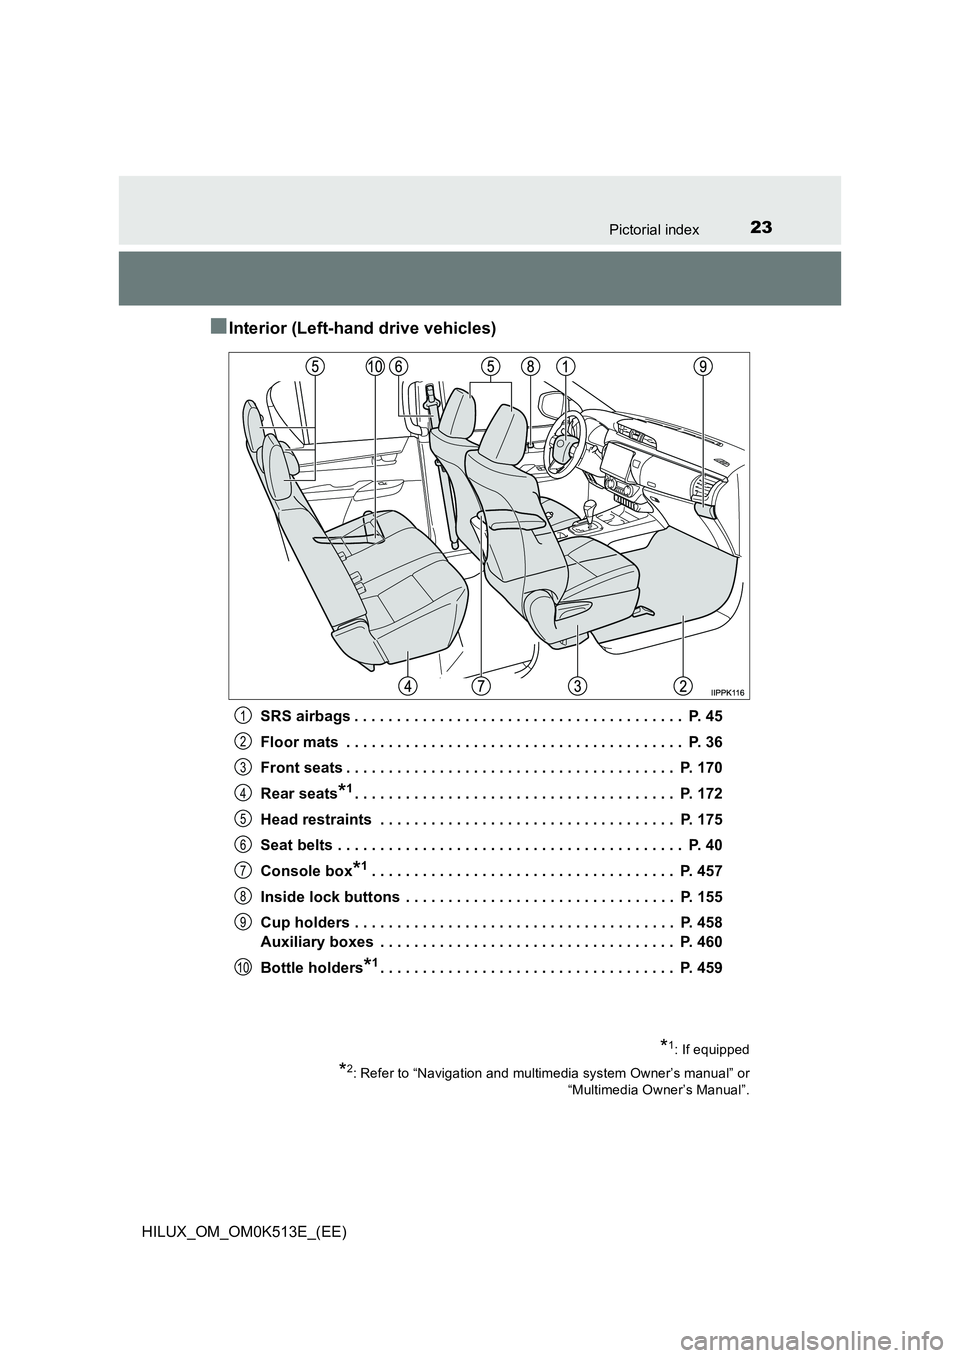 TOYOTA HILUX 2021  Owners Manual (in English) 23Pictorial index
HILUX_OM_OM0K513E_(EE)
�QInterior (Left-hand drive vehicles)
SRS airbags . . . . . . . . . . . . . . . . . . . . . . . . . . . . . . . . . . . . . . .  P. 45 
Floor mats  . . . . . .